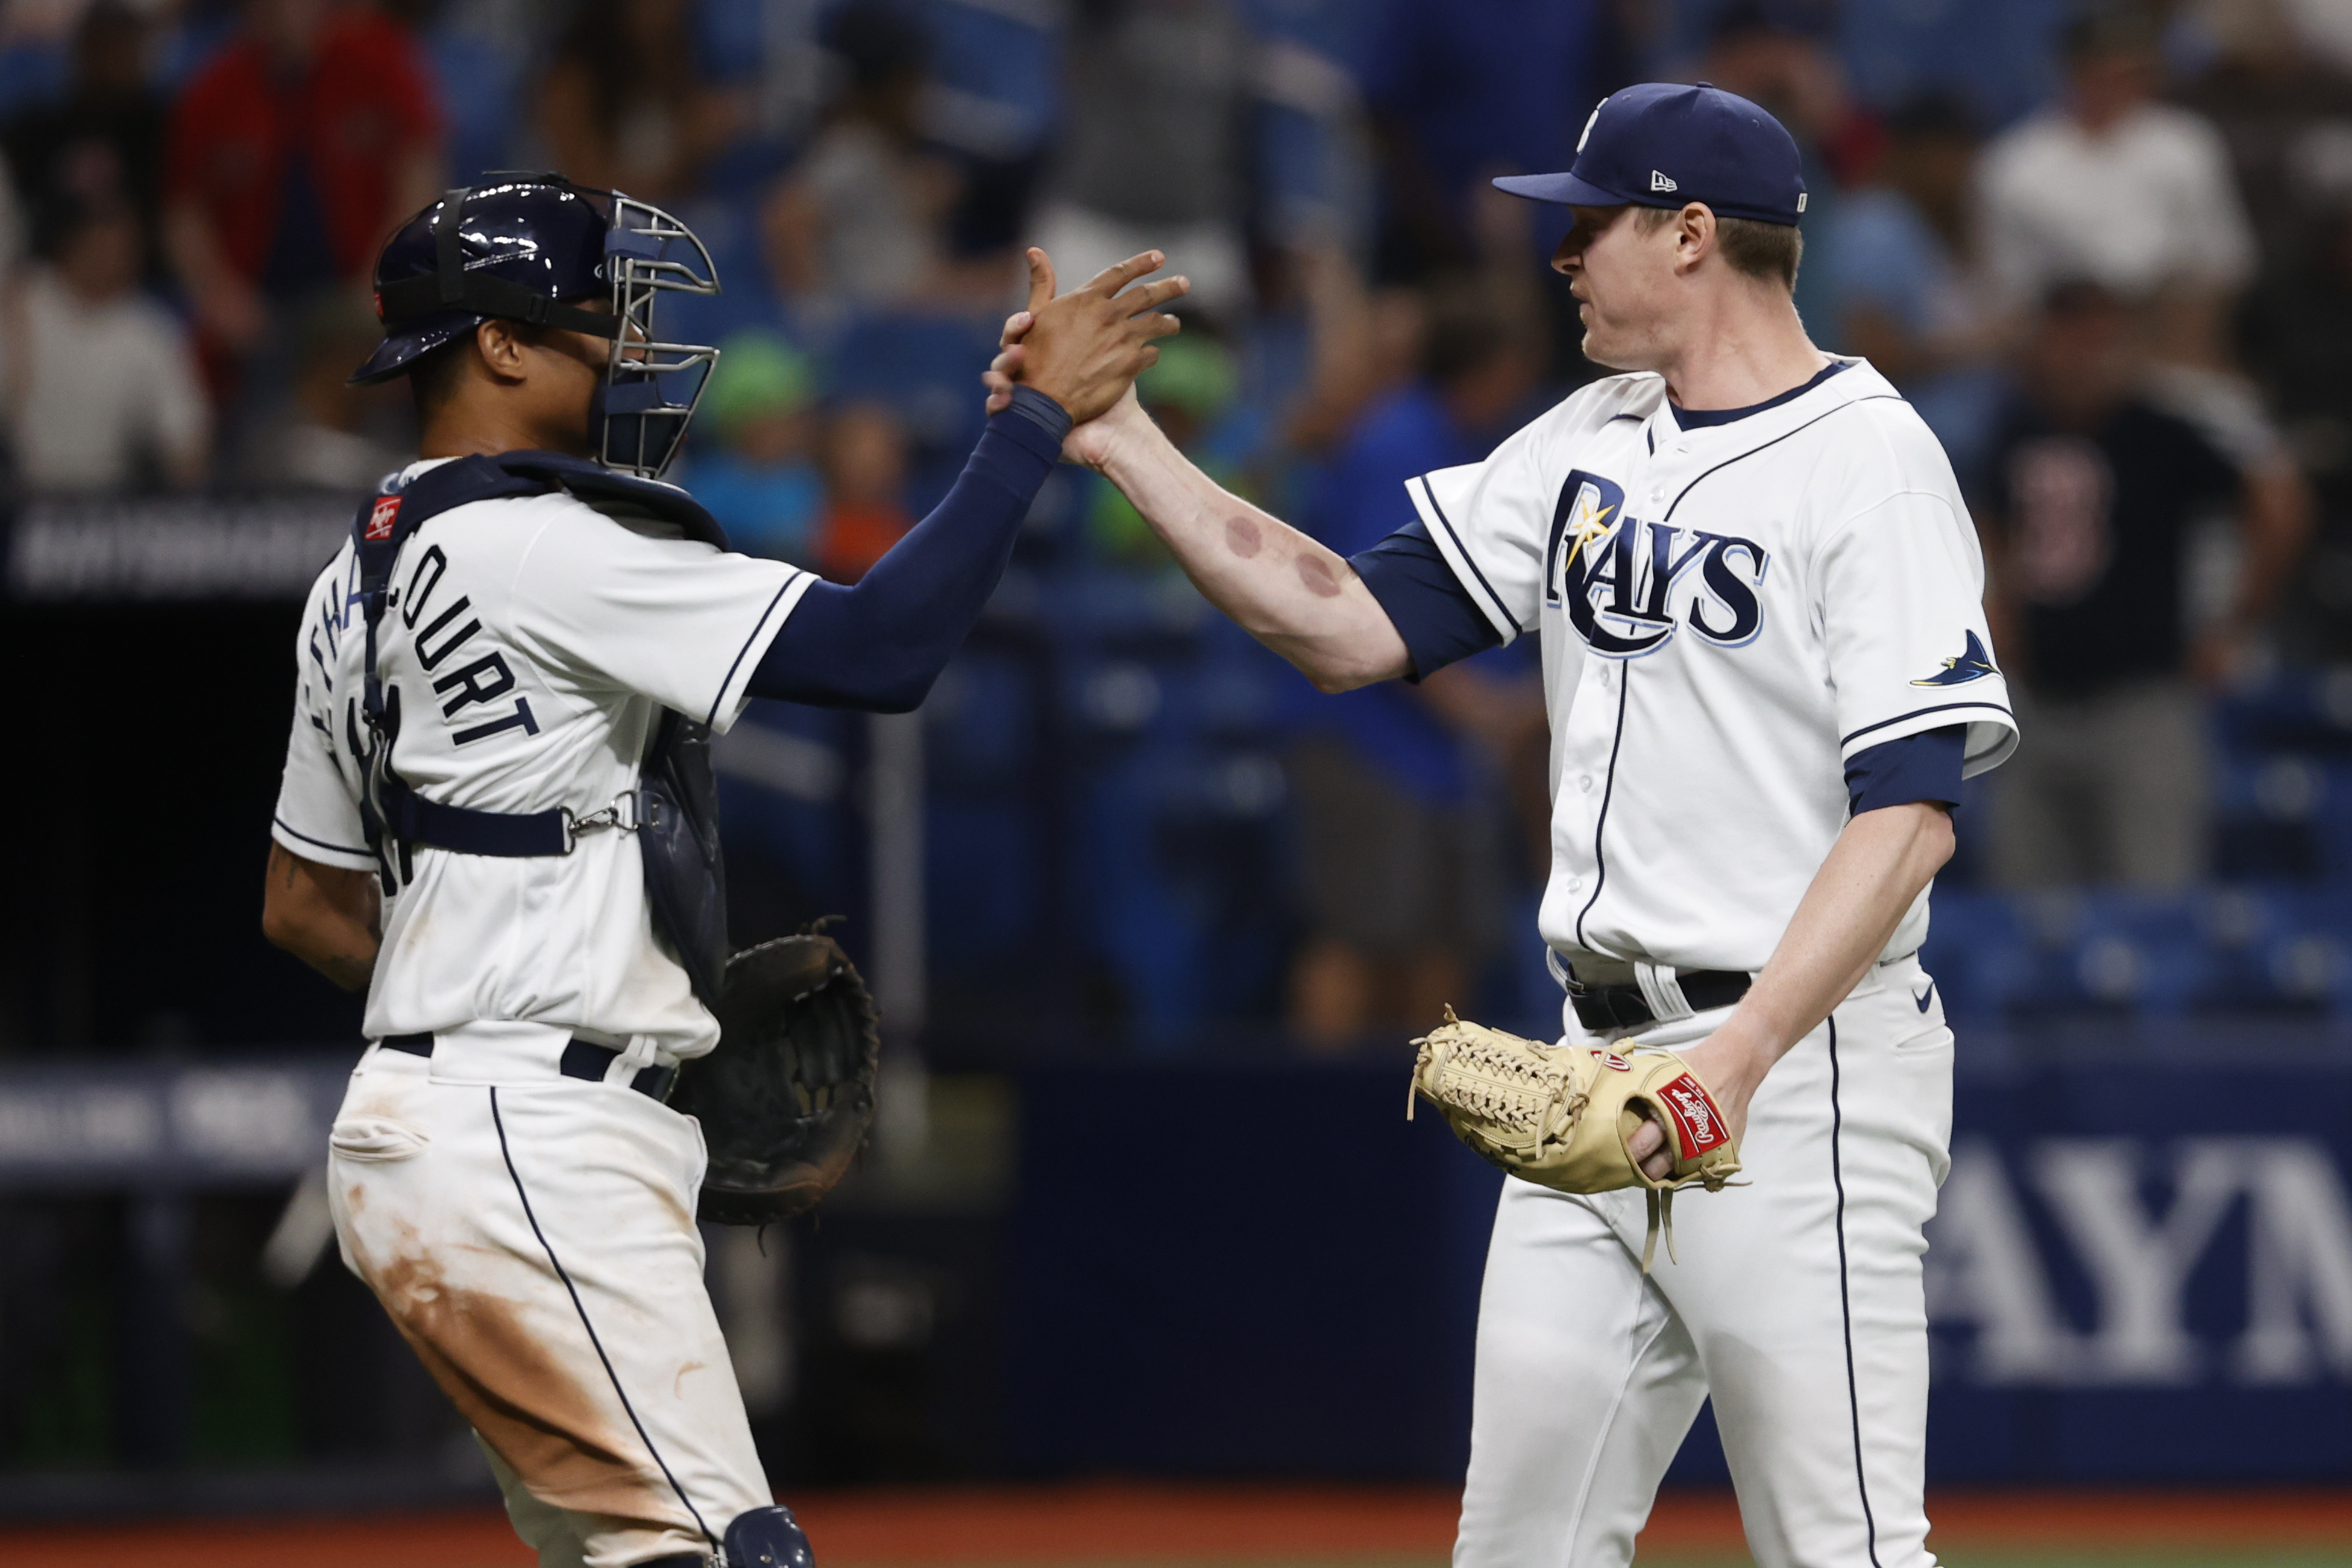 Tampa Bay Rays catcher Christian Bethancourt, right, leans away as